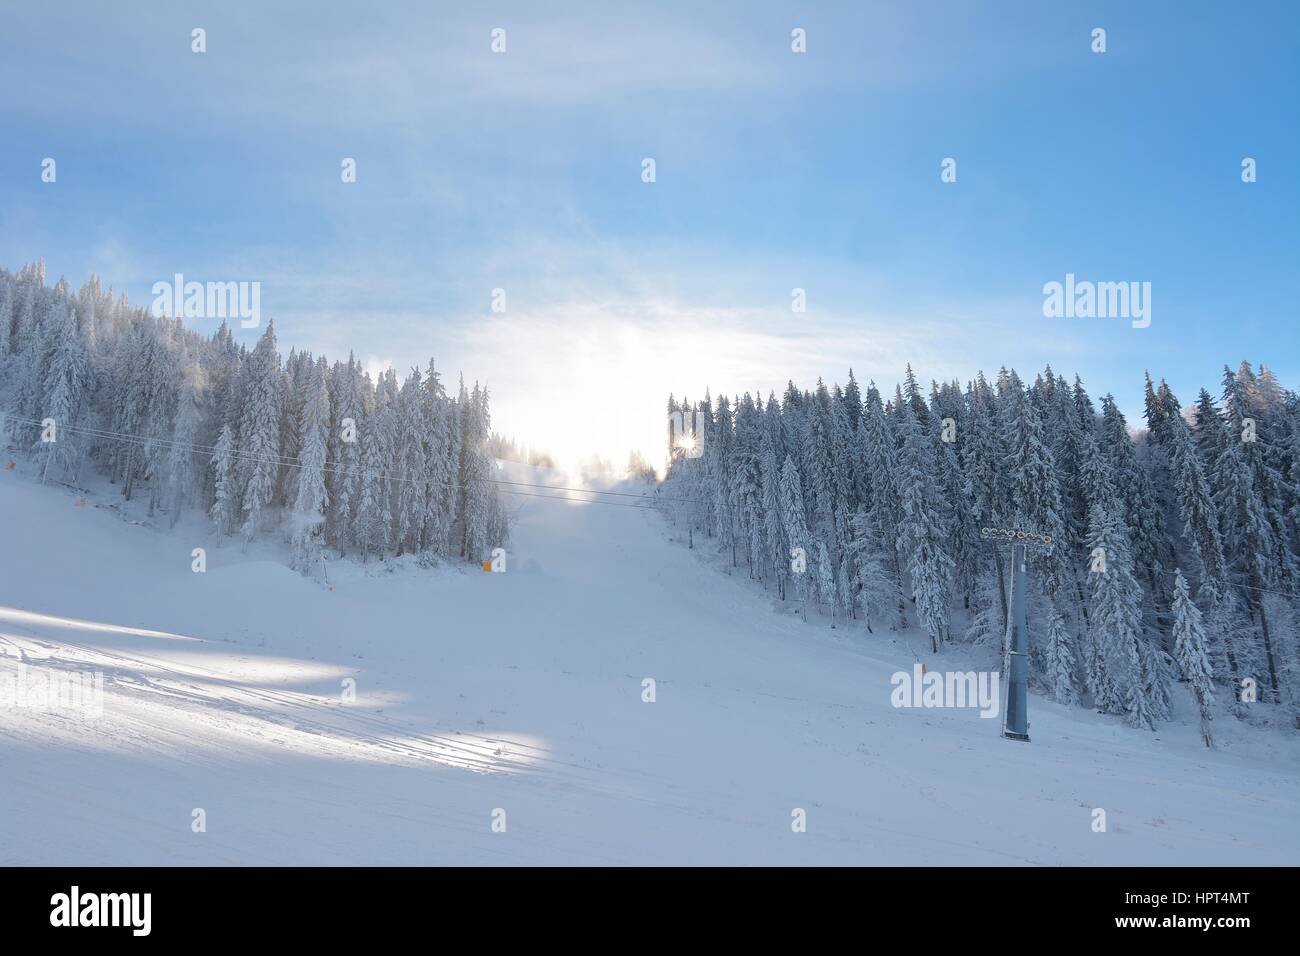 Poiana Brasov High Resolution Stock Photography and Images - Alamy